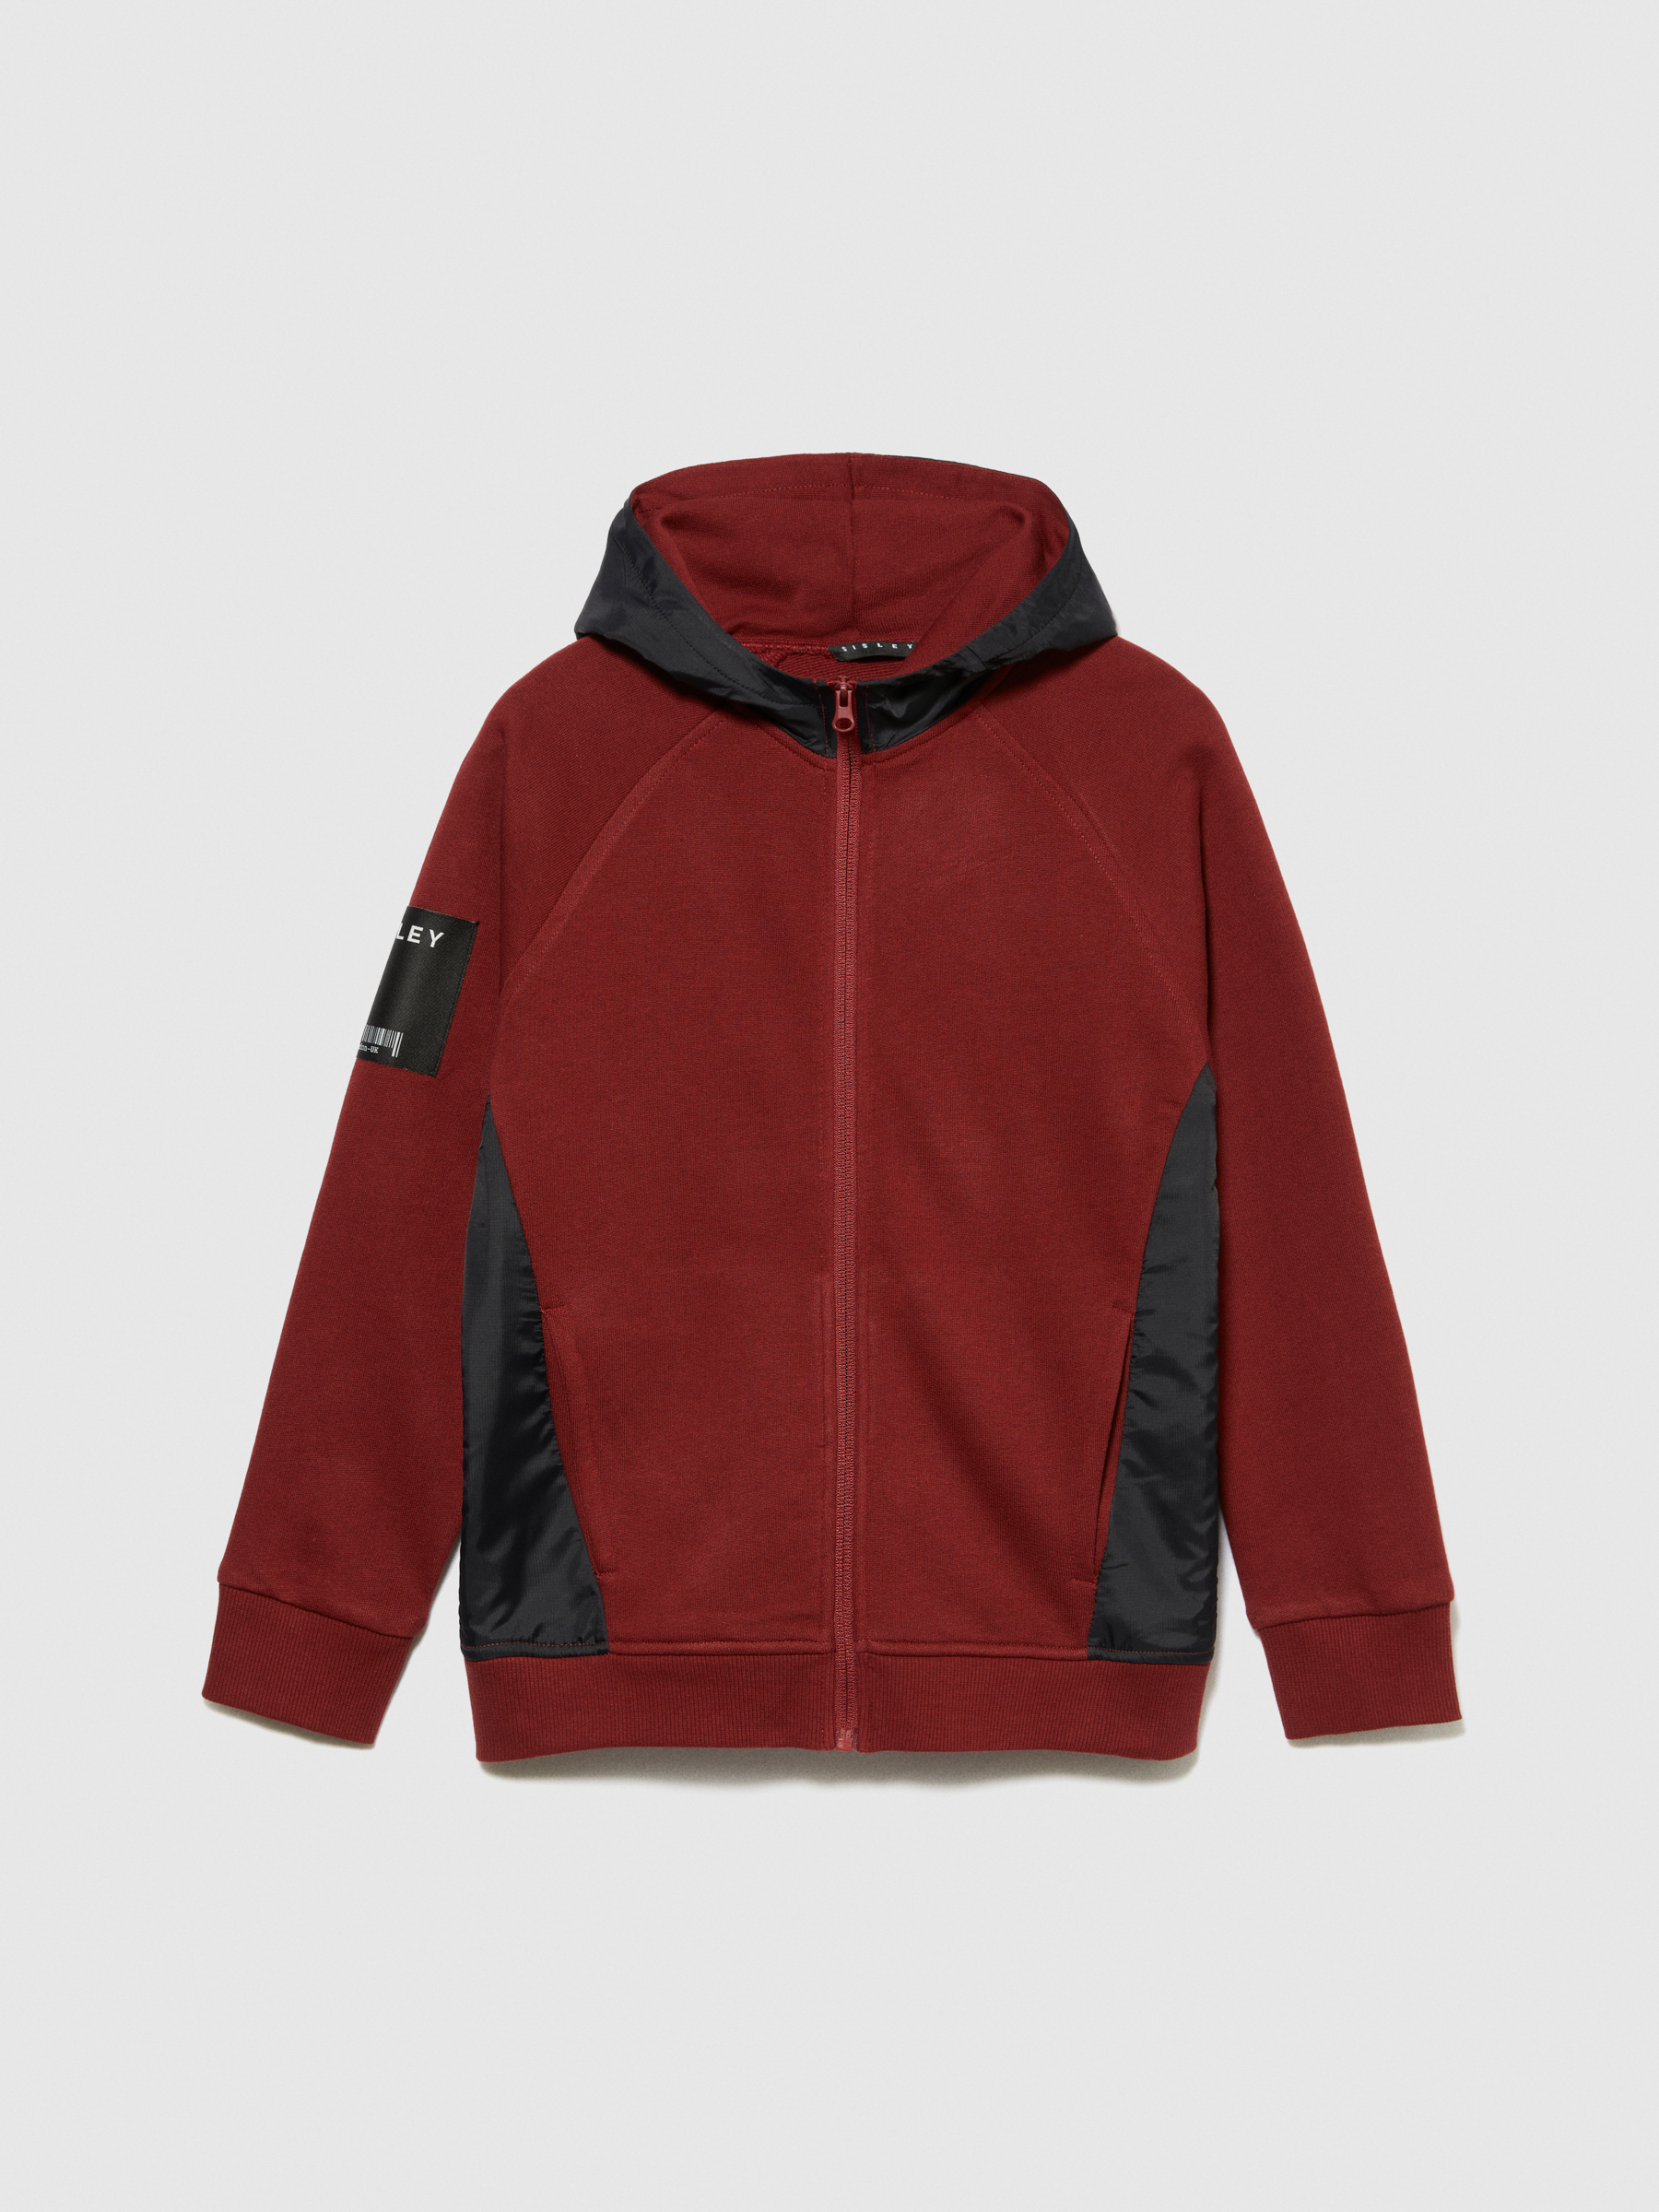 Sisley Young - Mixed Material Hoodie, Man, Burgundy, Size: S